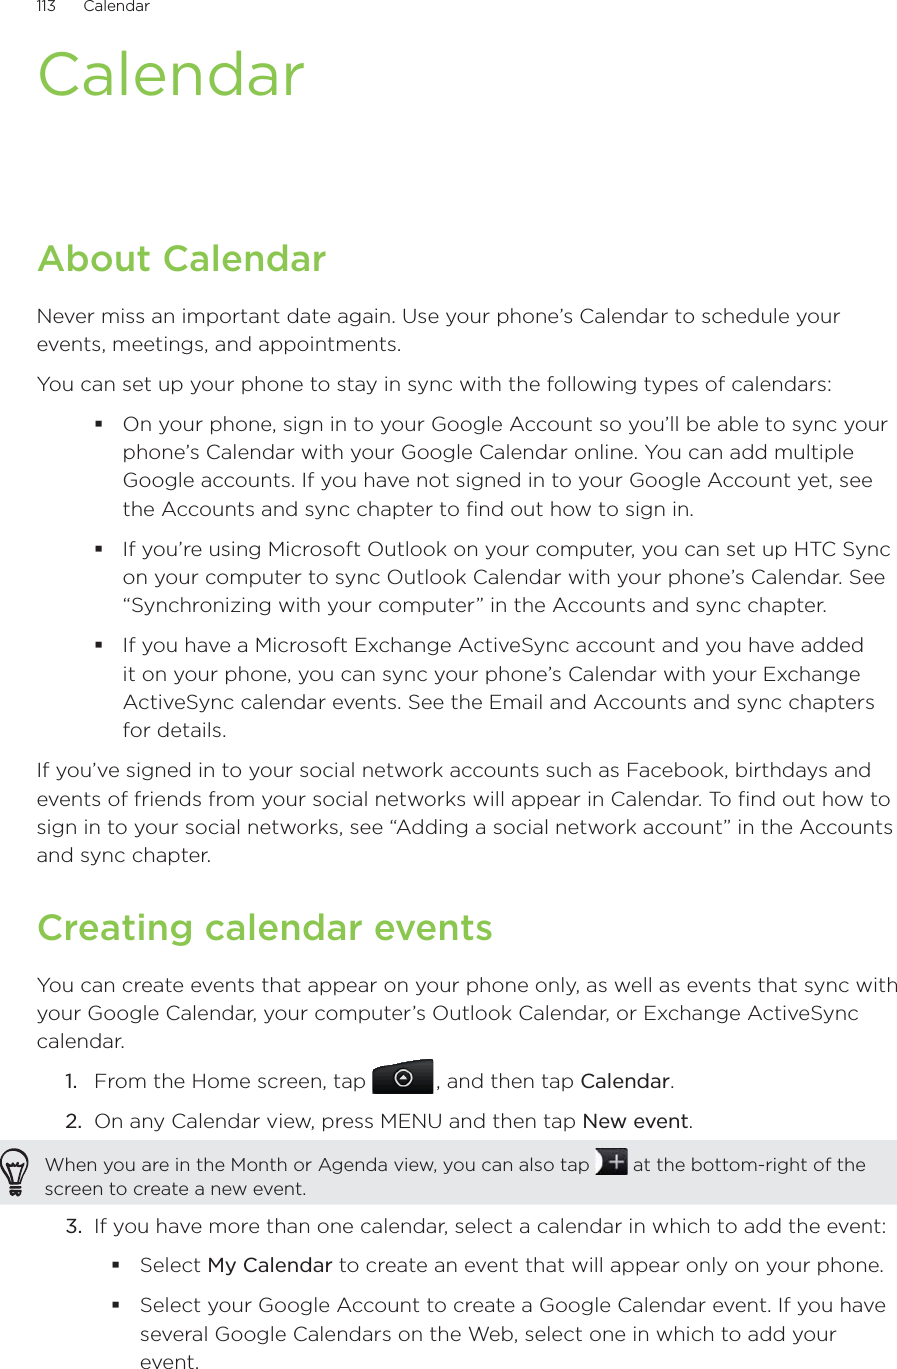 113      Calendar      CalendarAbout CalendarNever miss an important date again. Use your phone’s Calendar to schedule your events, meetings, and appointments.You can set up your phone to stay in sync with the following types of calendars:On your phone, sign in to your Google Account so you’ll be able to sync your phone’s Calendar with your Google Calendar online. You can add multiple Google accounts. If you have not signed in to your Google Account yet, see the Accounts and sync chapter to find out how to sign in.If you’re using Microsoft Outlook on your computer, you can set up HTC Sync on your computer to sync Outlook Calendar with your phone’s Calendar. See “Synchronizing with your computer” in the Accounts and sync chapter.If you have a Microsoft Exchange ActiveSync account and you have added it on your phone, you can sync your phone’s Calendar with your Exchange ActiveSync calendar events. See the Email and Accounts and sync chapters for details.If you’ve signed in to your social network accounts such as Facebook, birthdays and events of friends from your social networks will appear in Calendar. To find out how to sign in to your social networks, see “Adding a social network account” in the Accounts and sync chapter.Creating calendar eventsYou can create events that appear on your phone only, as well as events that sync with your Google Calendar, your computer’s Outlook Calendar, or Exchange ActiveSync calendar.1.  From the Home screen, tap  , and then tap Calendar.2.  On any Calendar view, press MENU and then tap New event.When you are in the Month or Agenda view, you can also tap   at the bottom-right of the screen to create a new event.3.  If you have more than one calendar, select a calendar in which to add the event:Select My Calendar to create an event that will appear only on your phone.Select your Google Account to create a Google Calendar event. If you have several Google Calendars on the Web, select one in which to add your event.